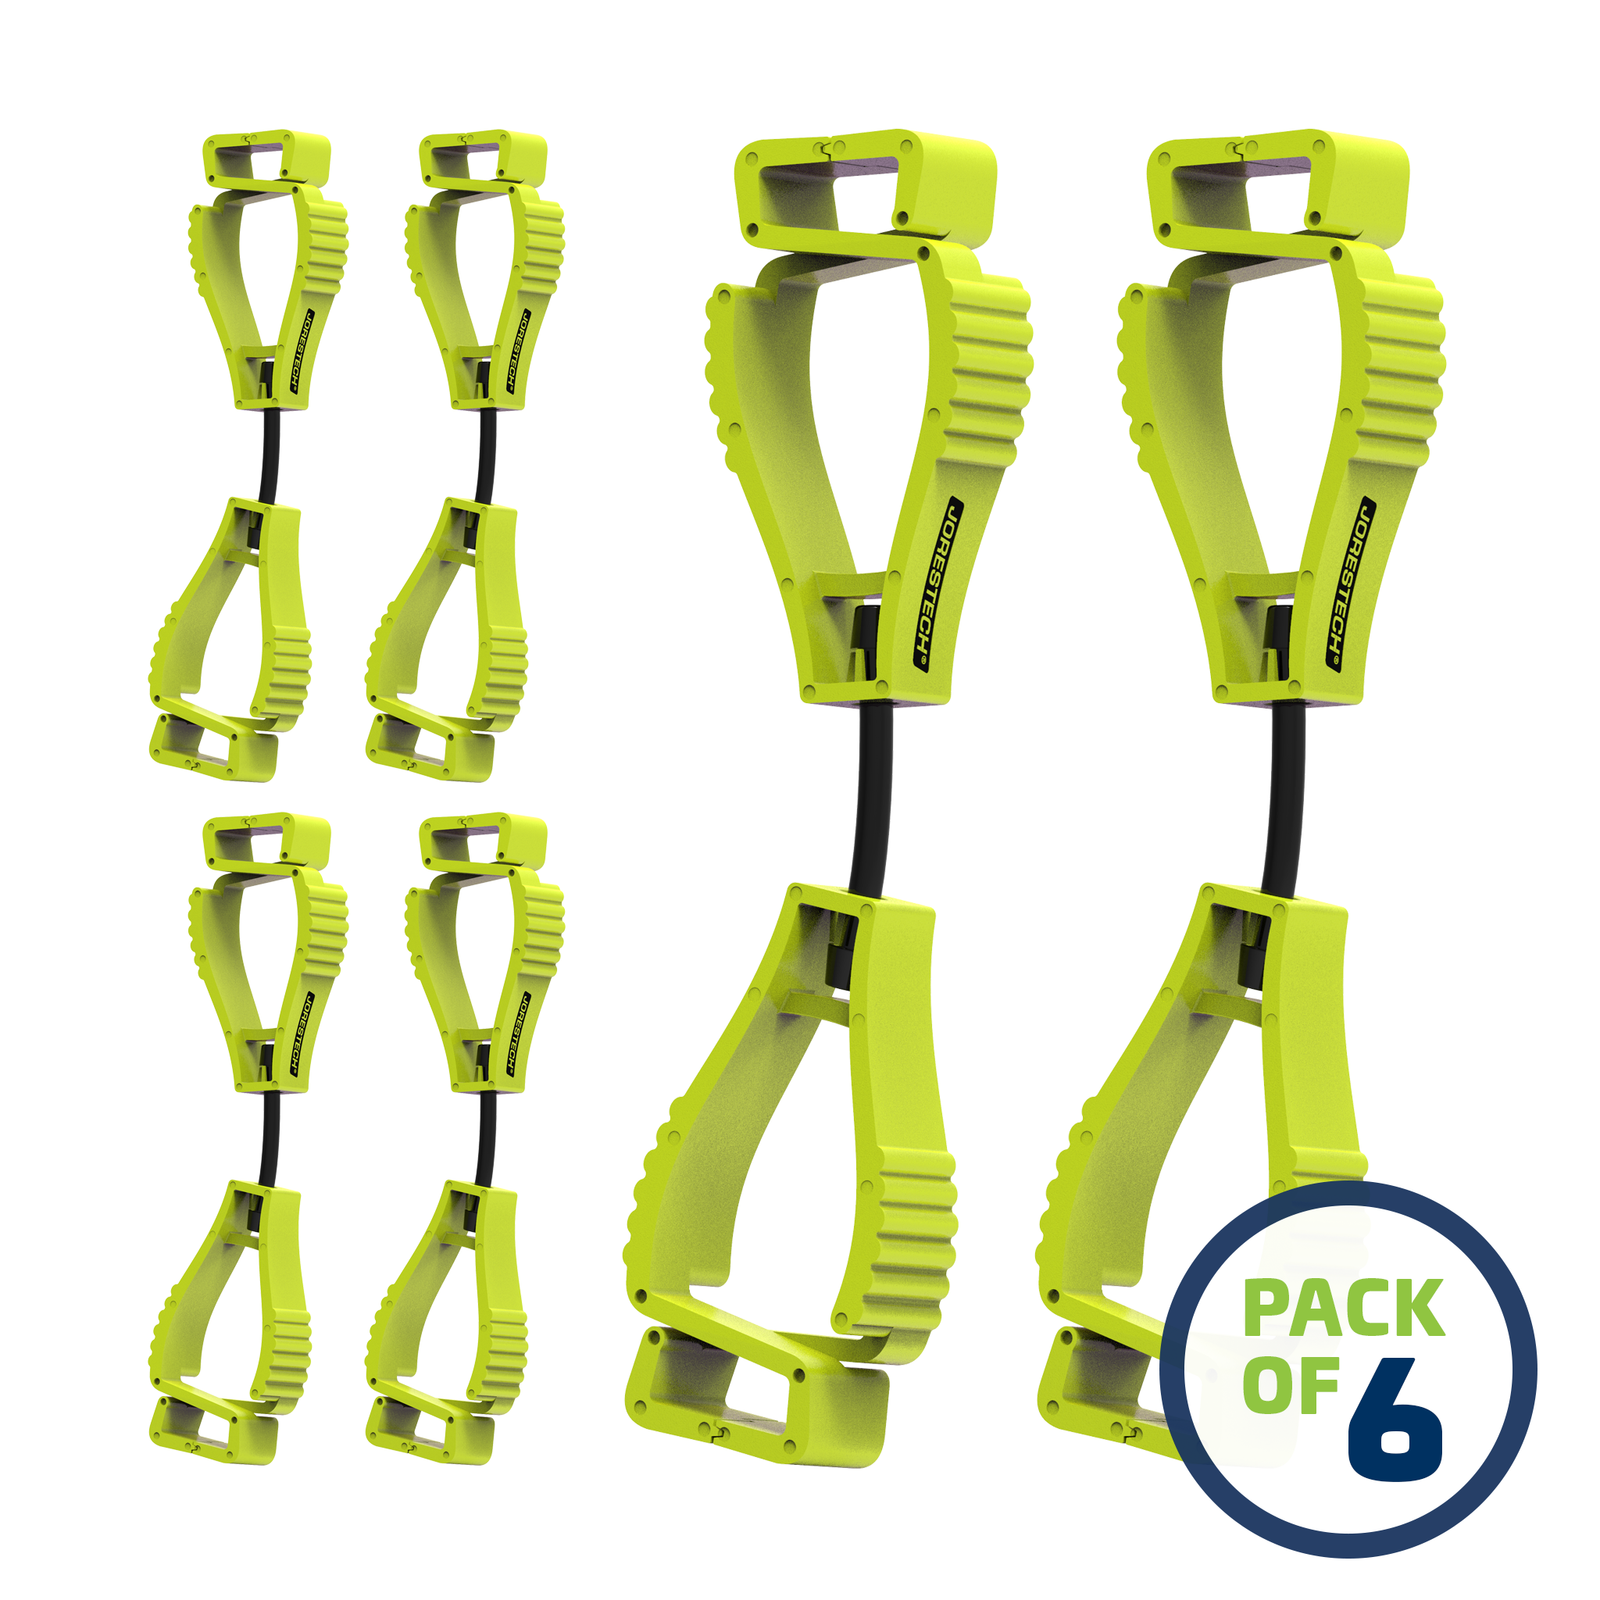 Pack of 6 Lime JORESTECH glove clip safety holders